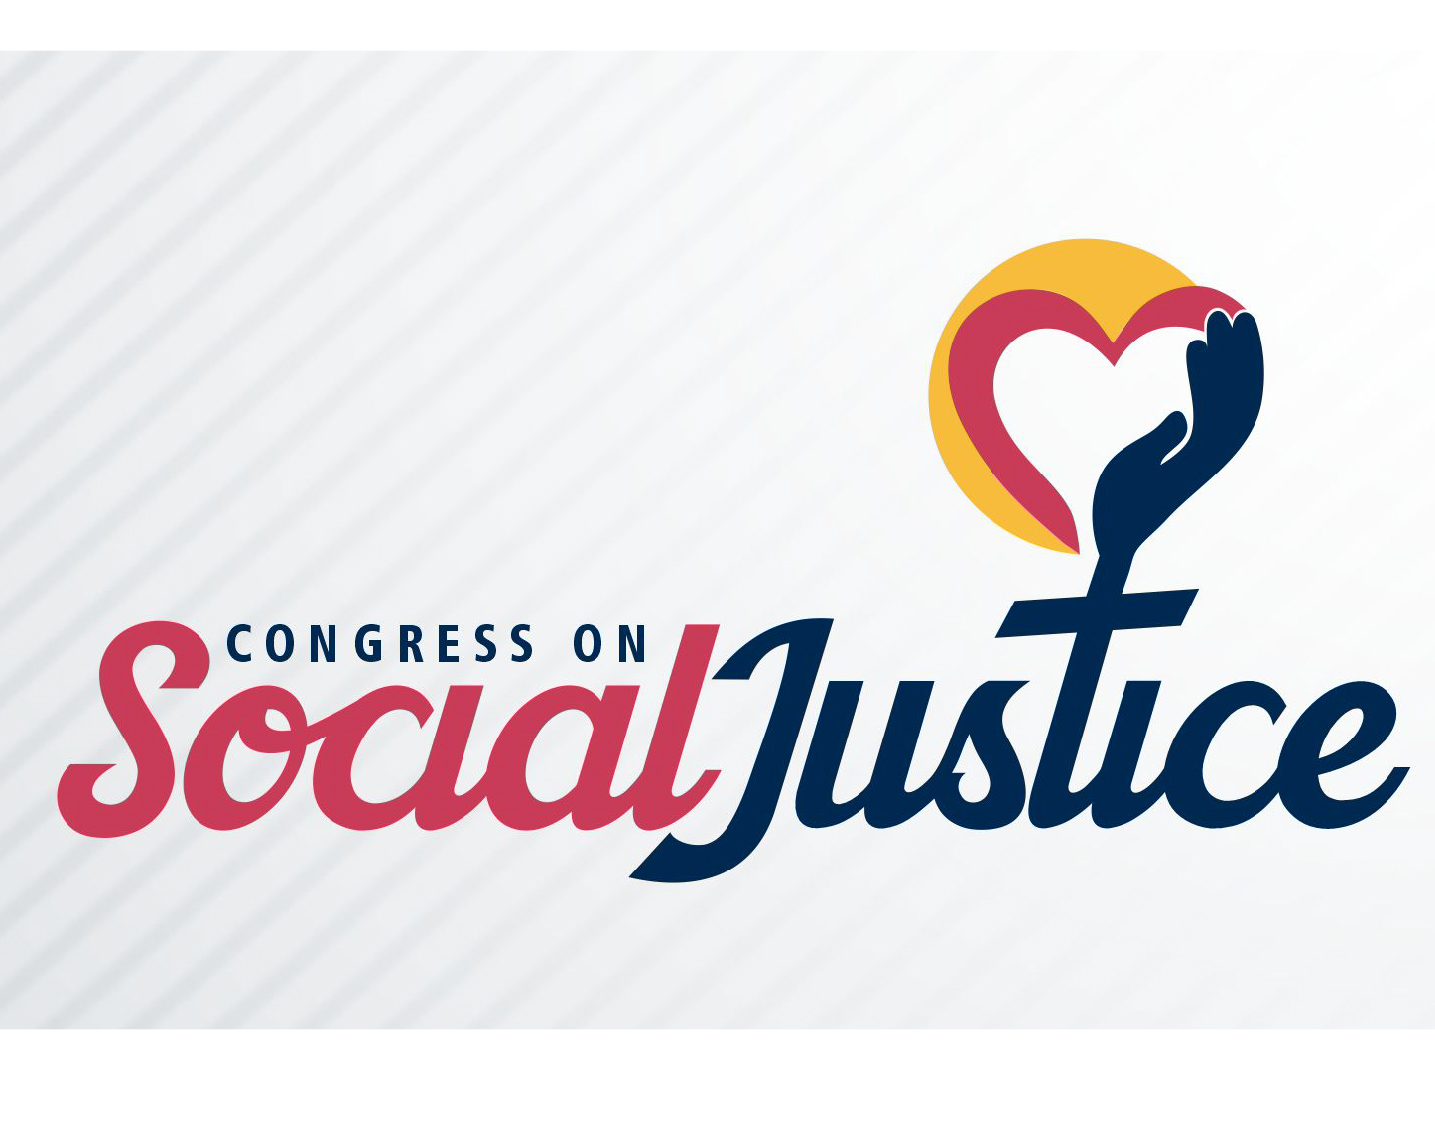 Andrews Congress on Social Justice 2021